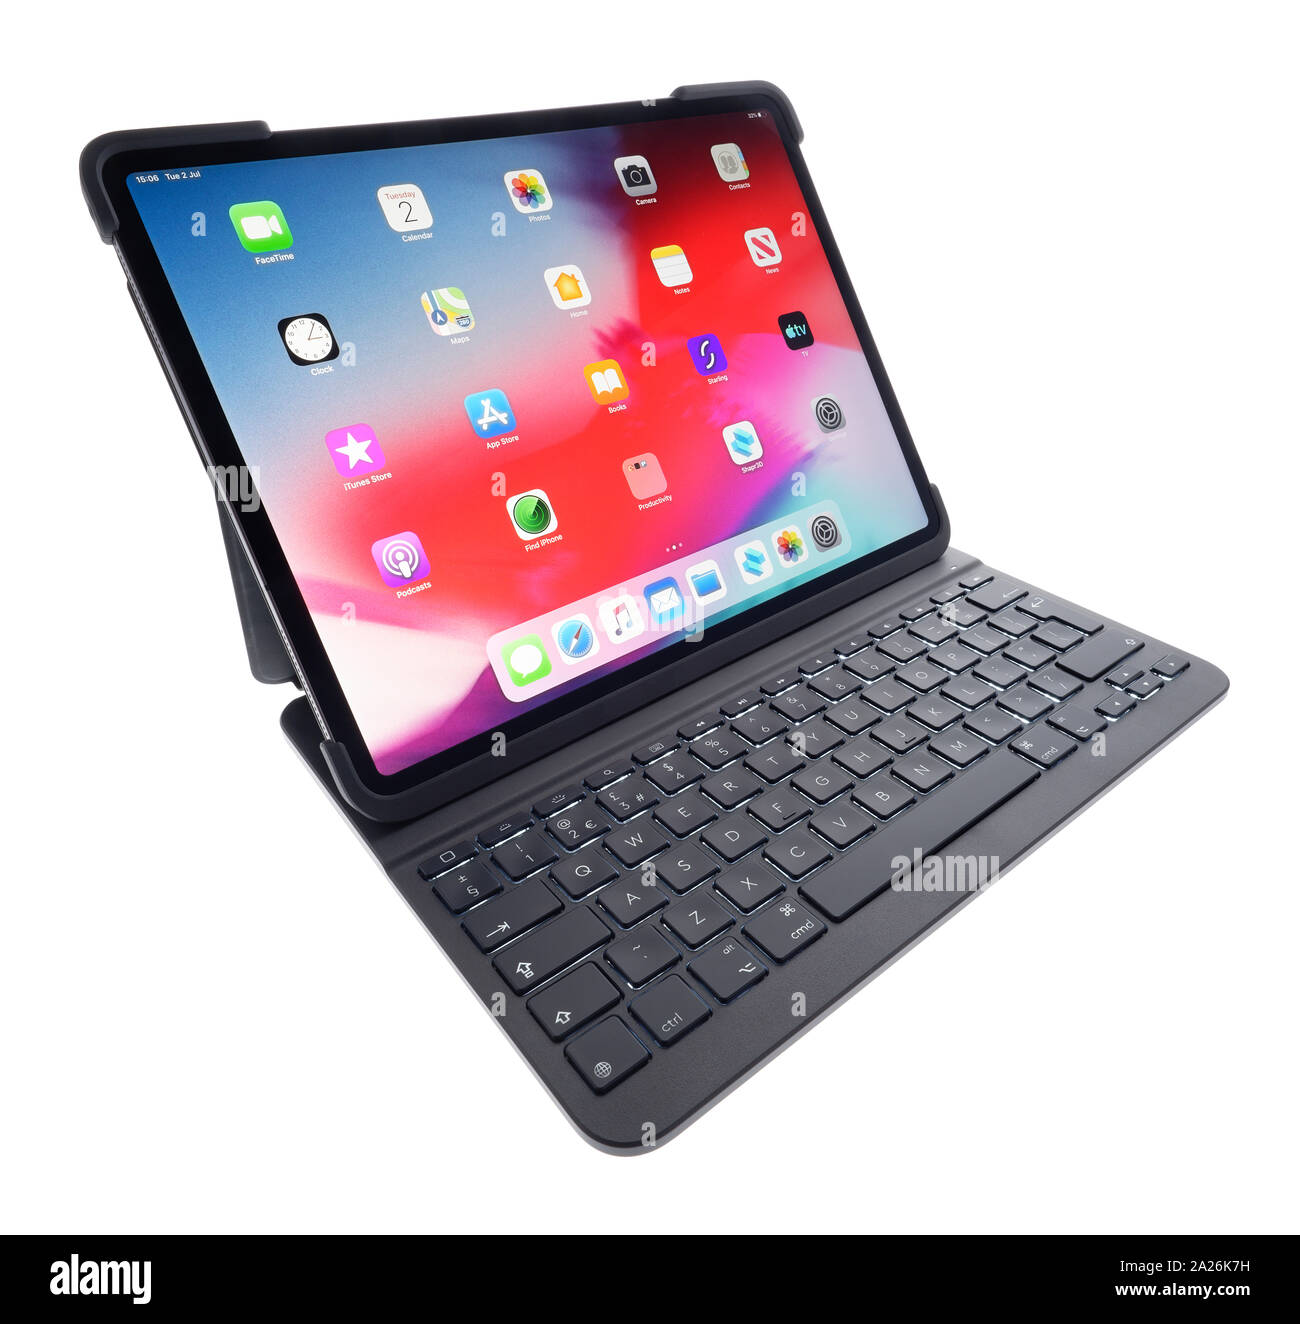 Logitech iPad Pro case which includes a keyboard. An Apple iPad